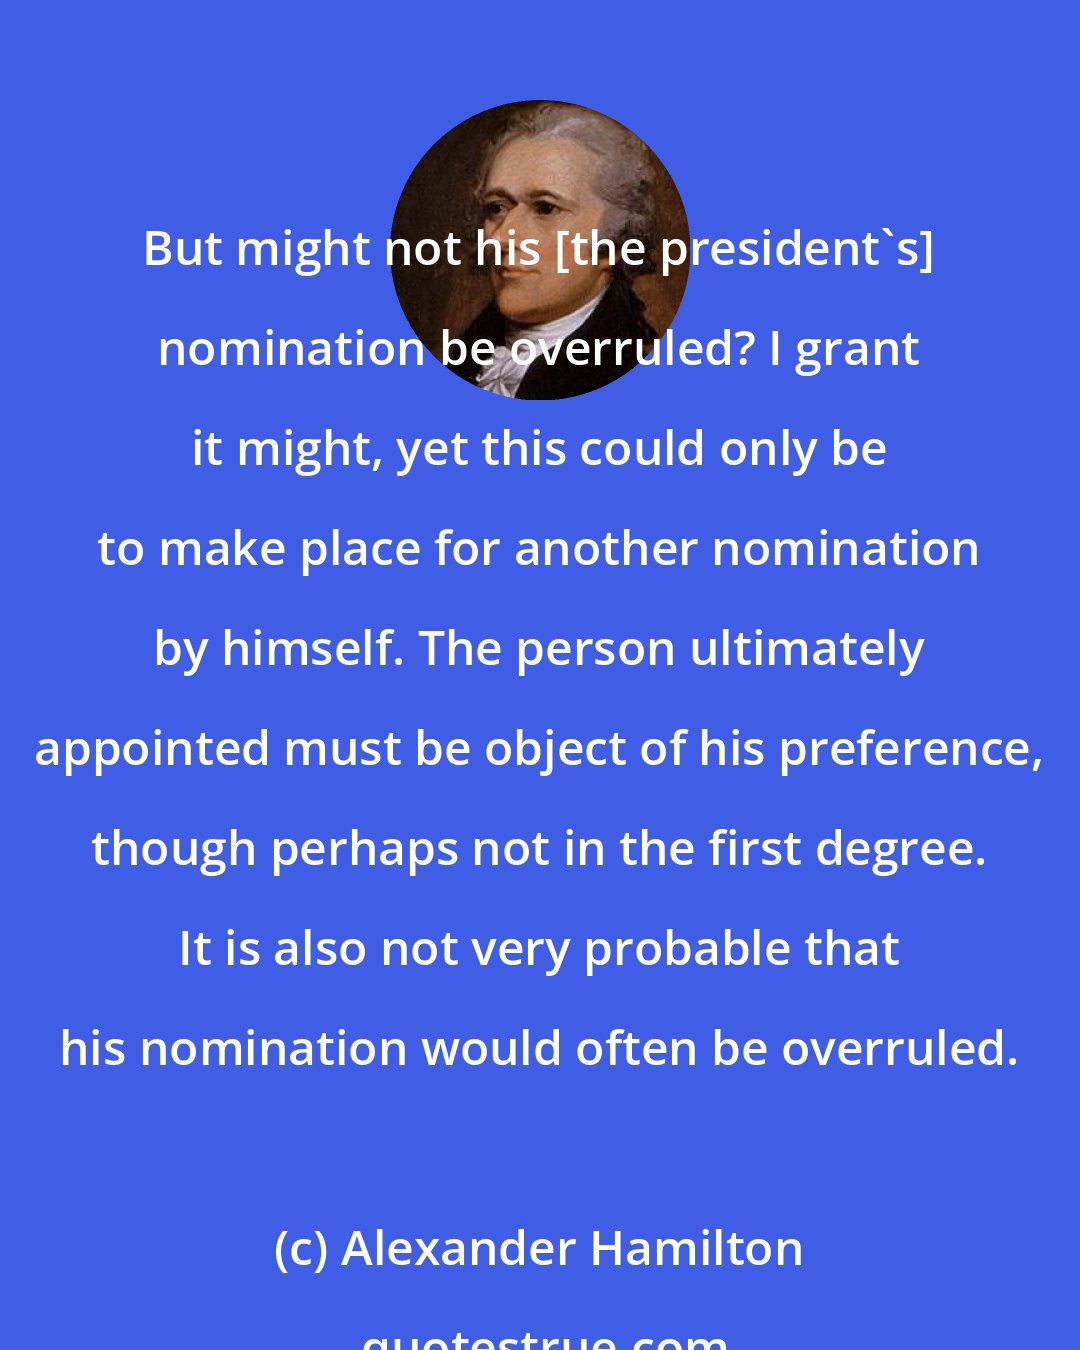 Alexander Hamilton: But might not his [the president's] nomination be overruled? I grant it might, yet this could only be to make place for another nomination by himself. The person ultimately appointed must be object of his preference, though perhaps not in the first degree. It is also not very probable that his nomination would often be overruled.